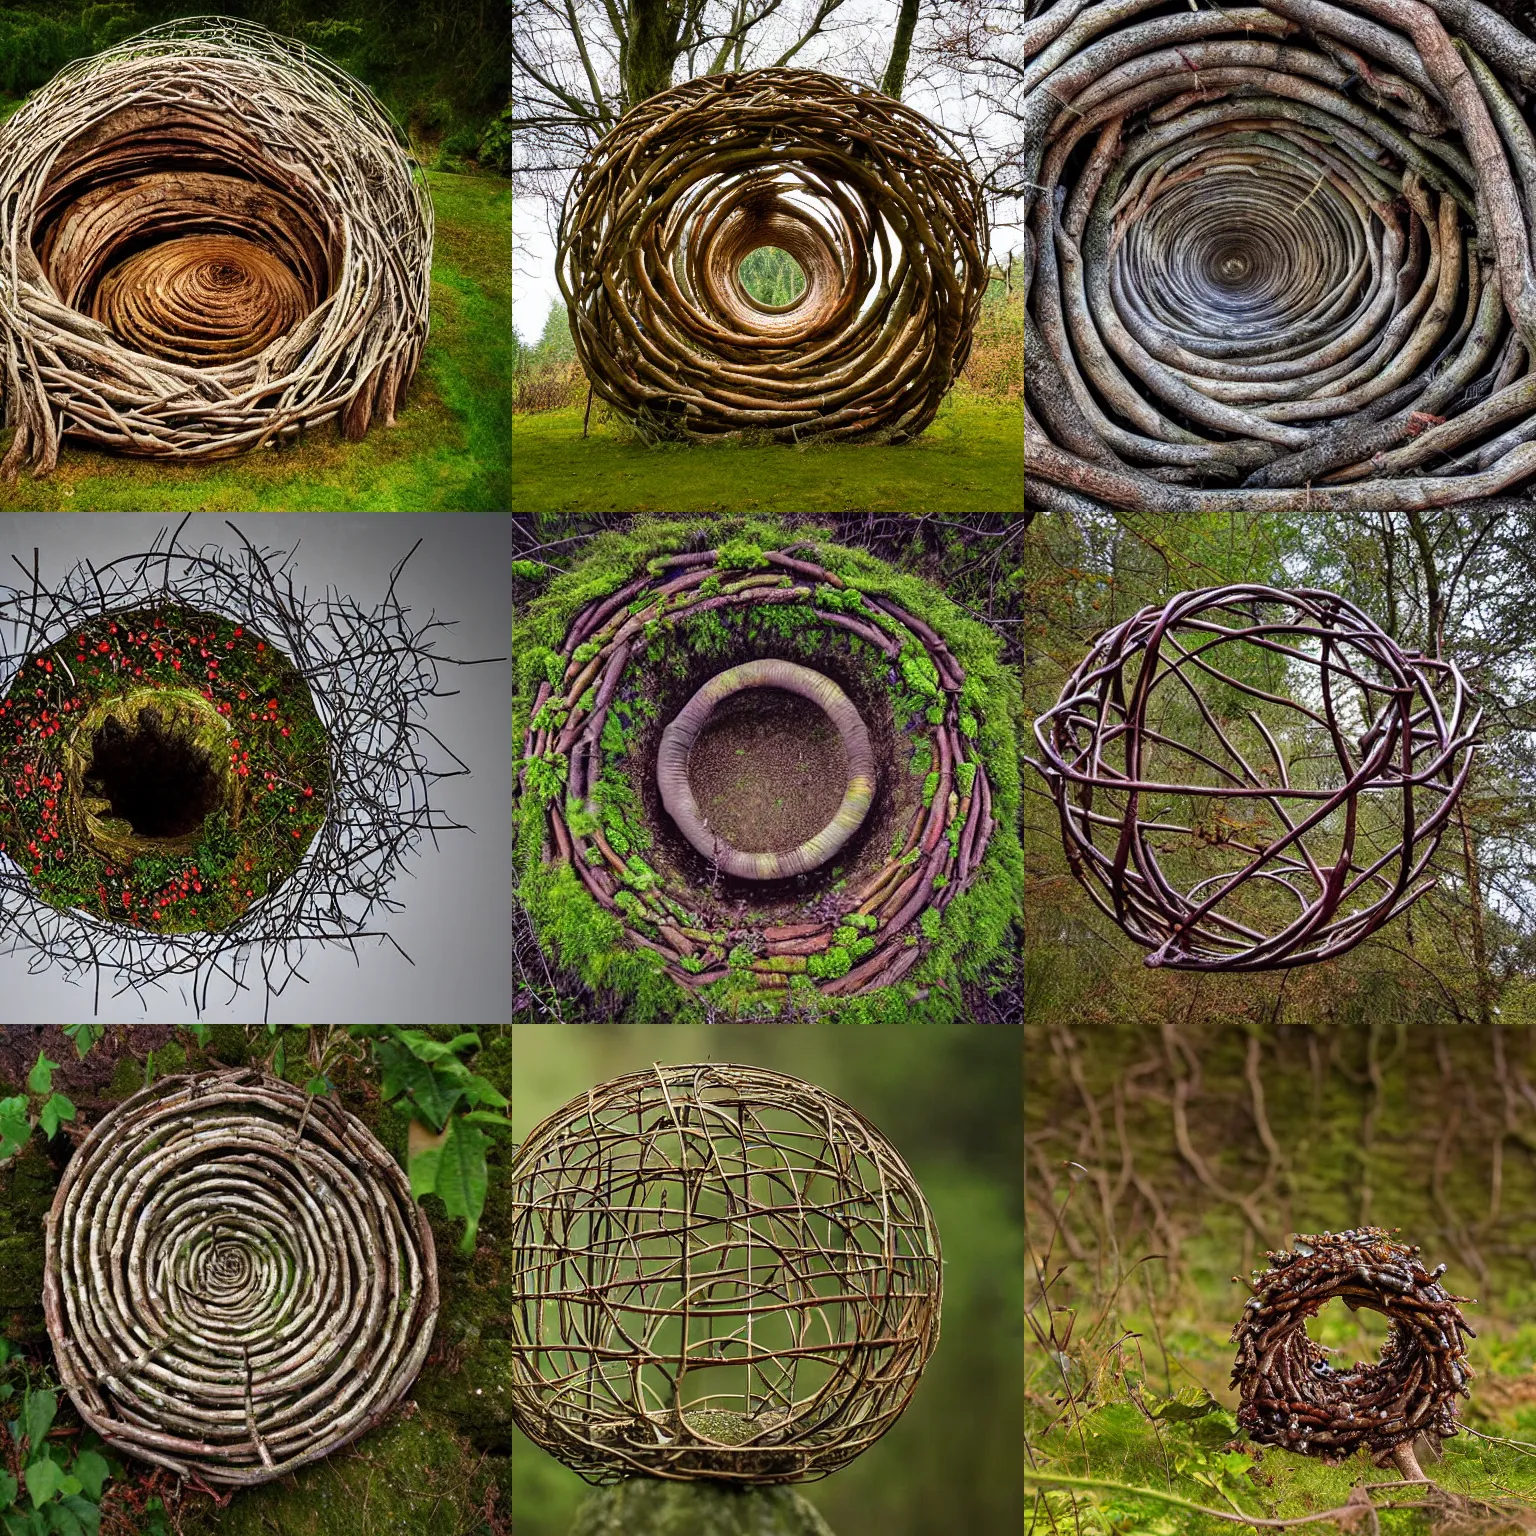 Prompt: an environment art sculpture by Nils-Udo, leaves twigs wood, nature, natural, round form, berries inside structure, leaf spiral pattern around structure